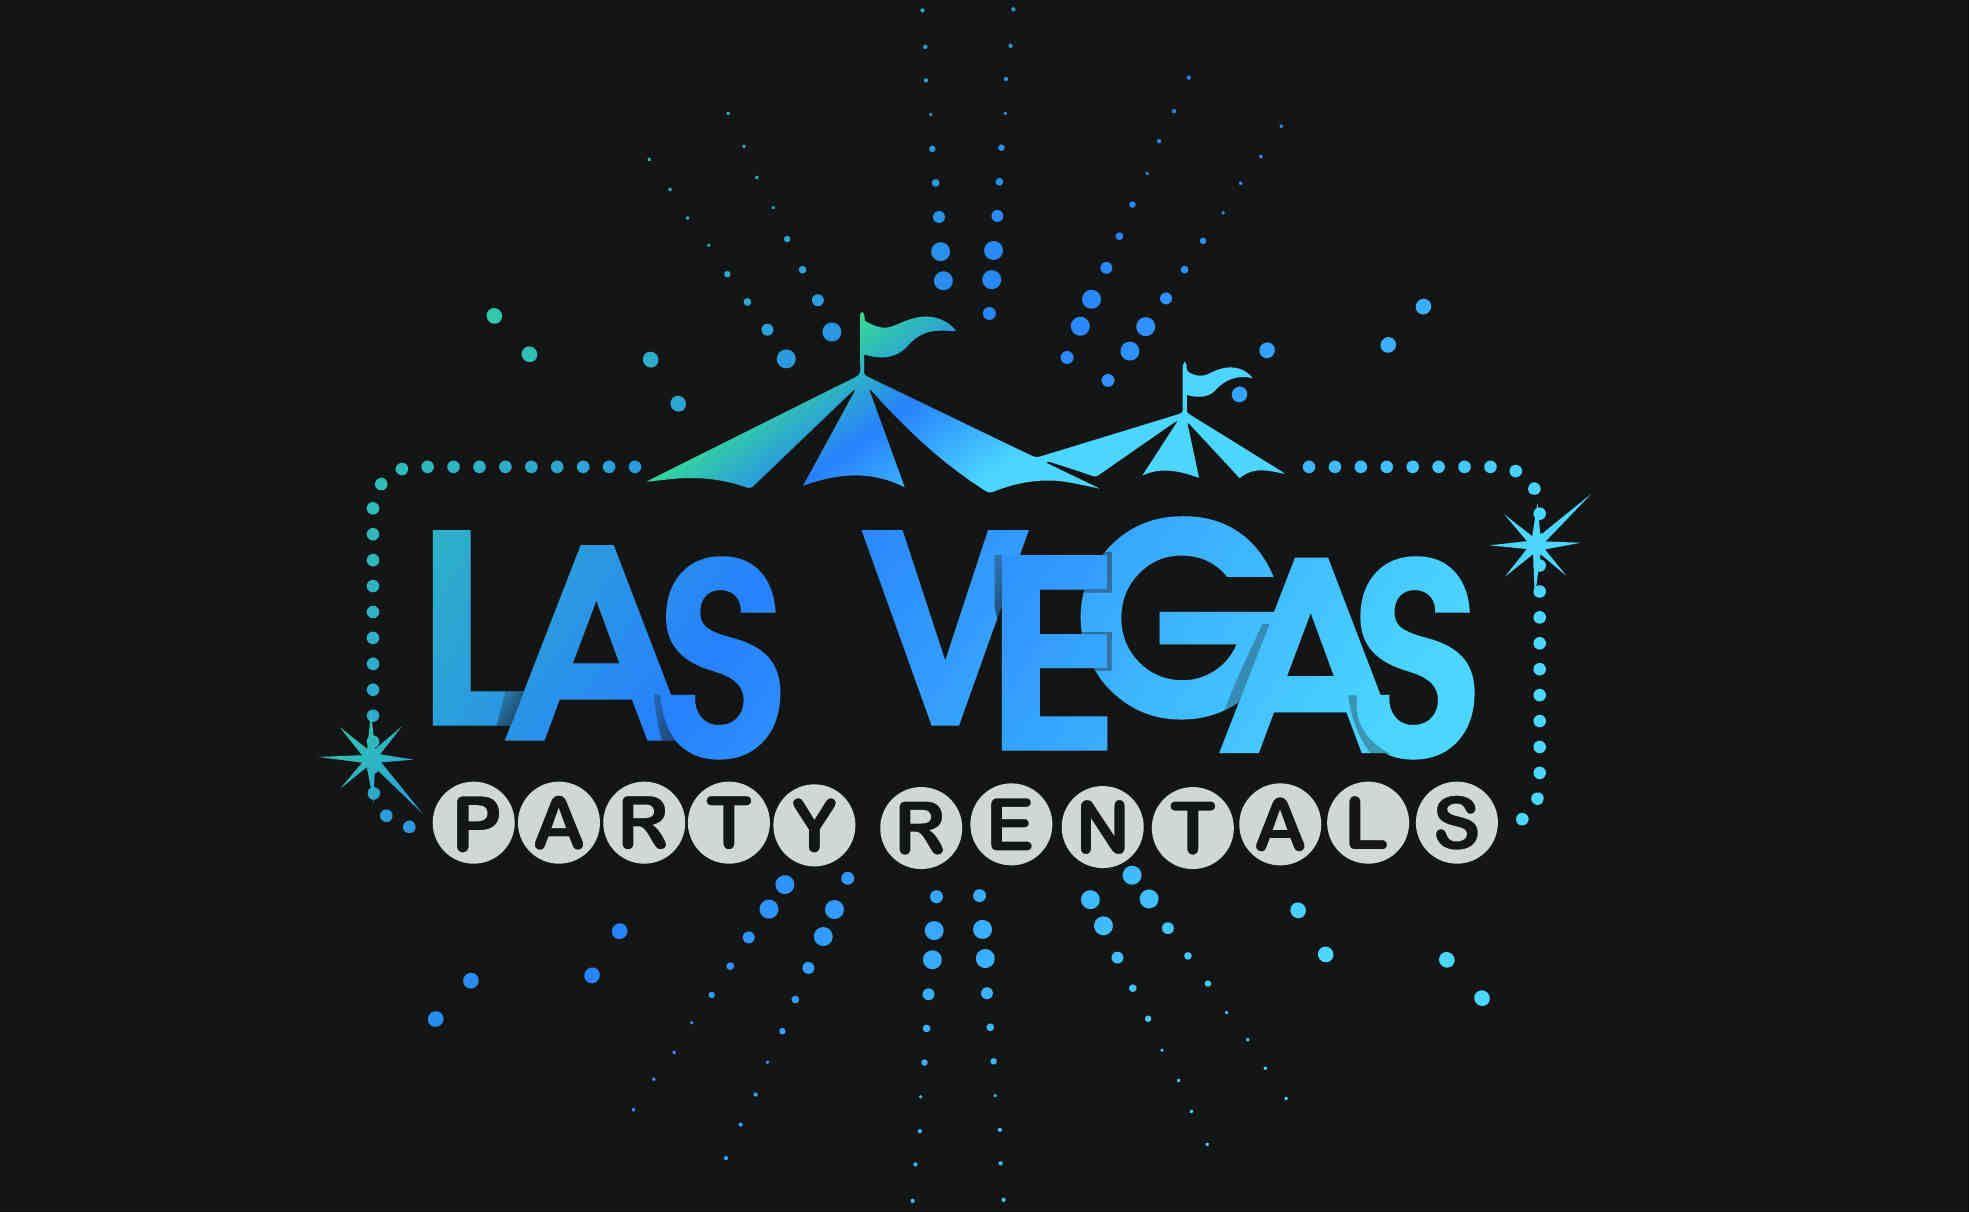 Welcome to Las Vegas Logo - Welcome to Las Vegas Party Rentals - Serving Las Vegas For Over 25 ...